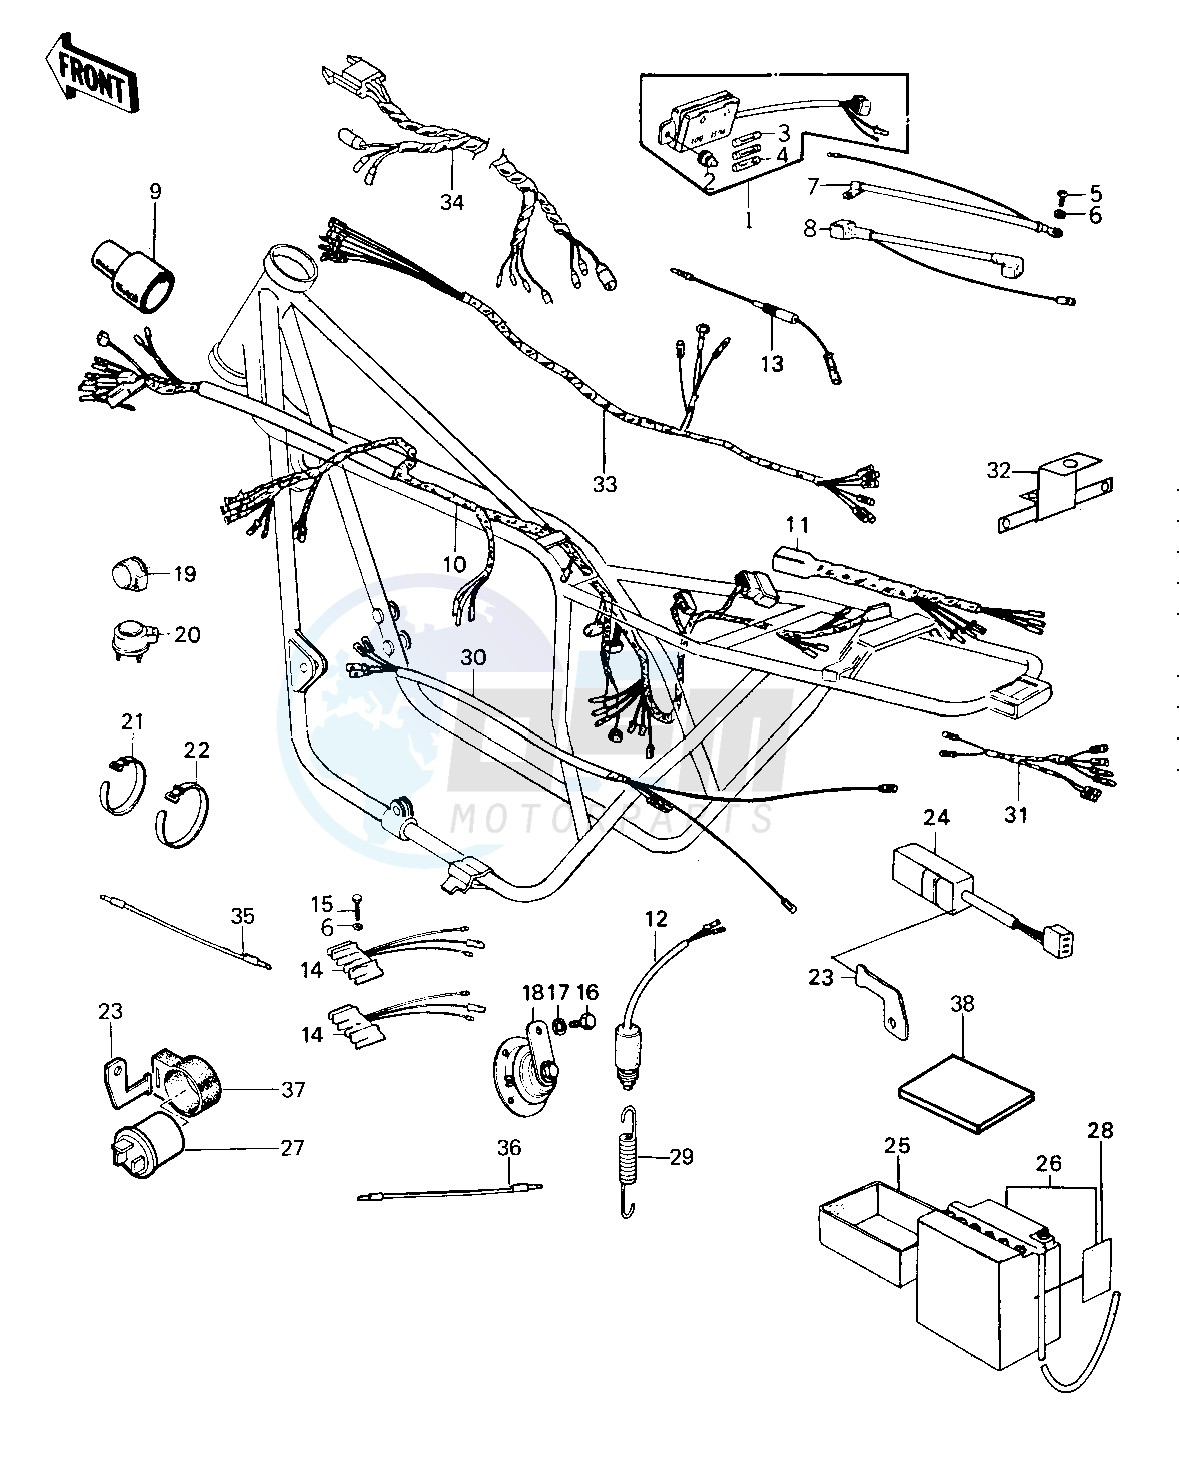 CHASSIS ELECTRICAL EQUIPMENT -- 79-81 C2_C3_C4- - blueprint